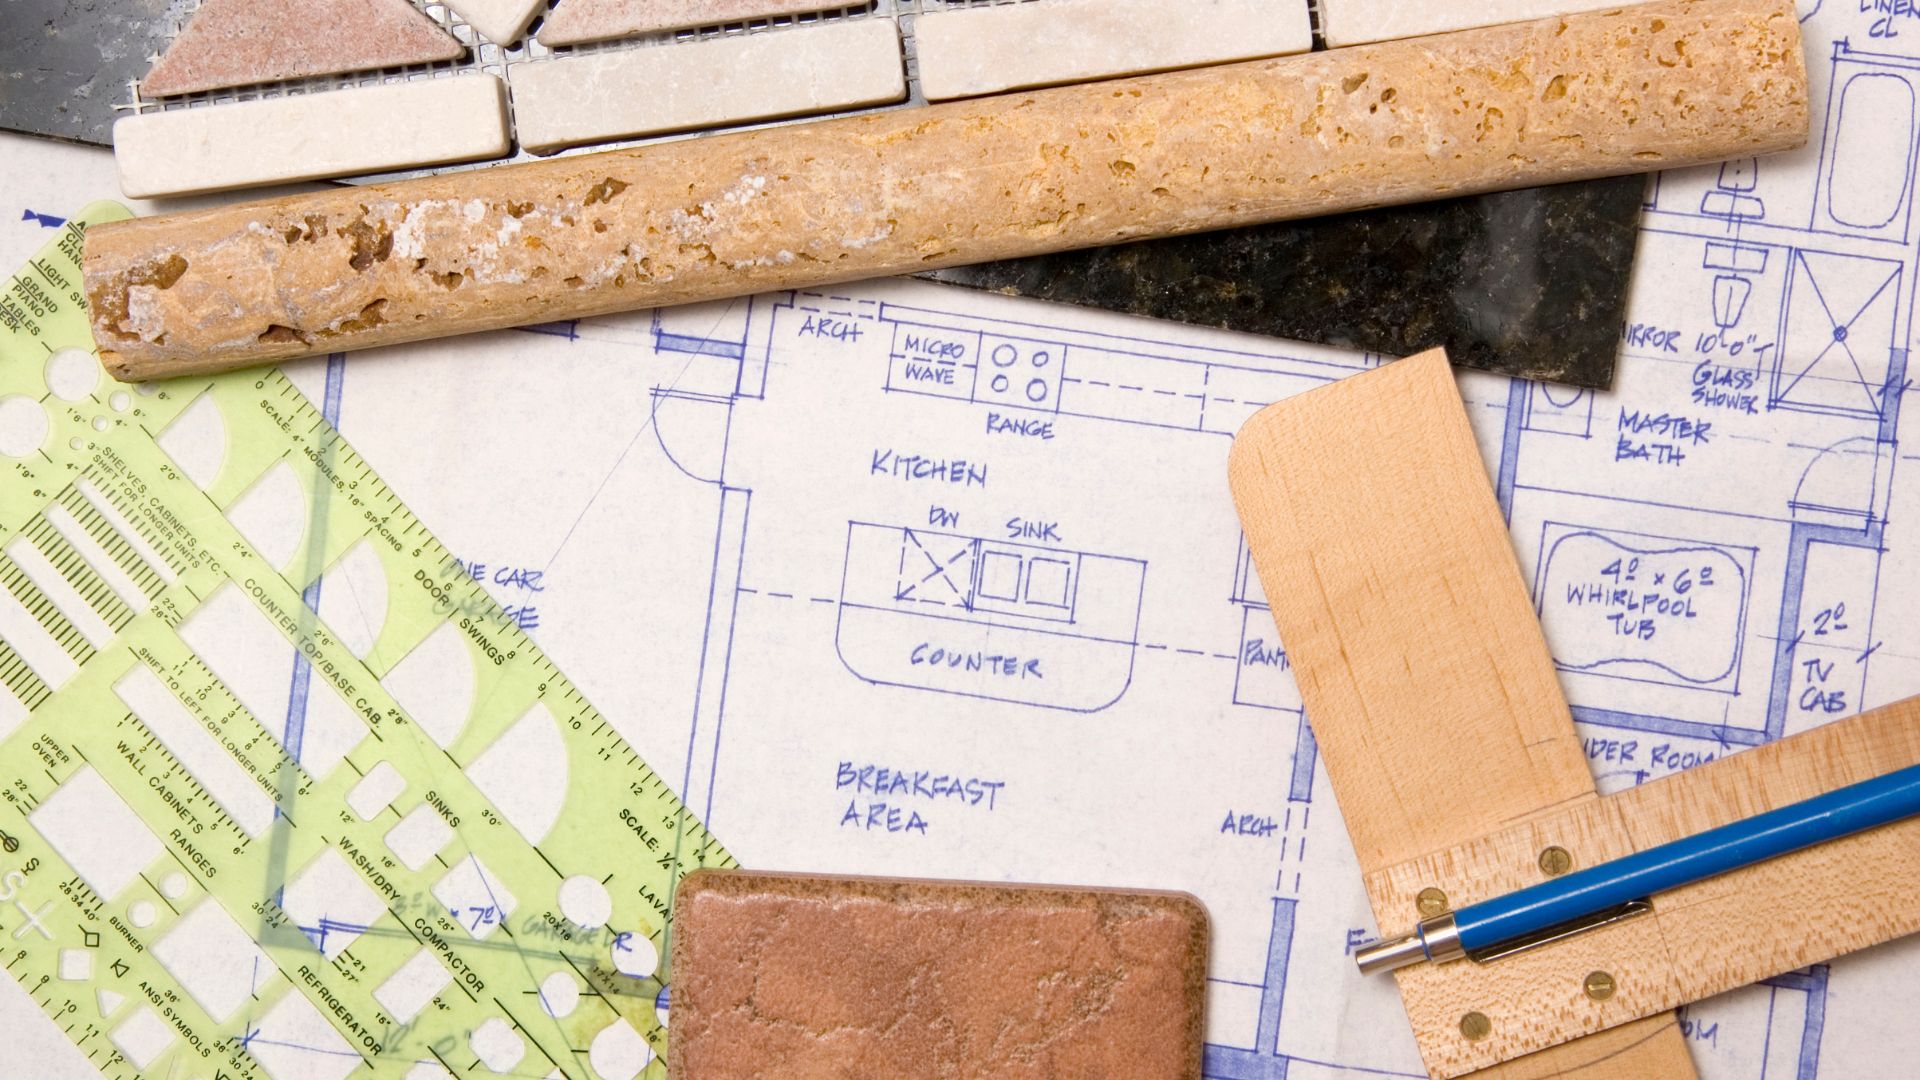 Blueprints for a luxury home remodeling project, surrounded by rulers and tools.